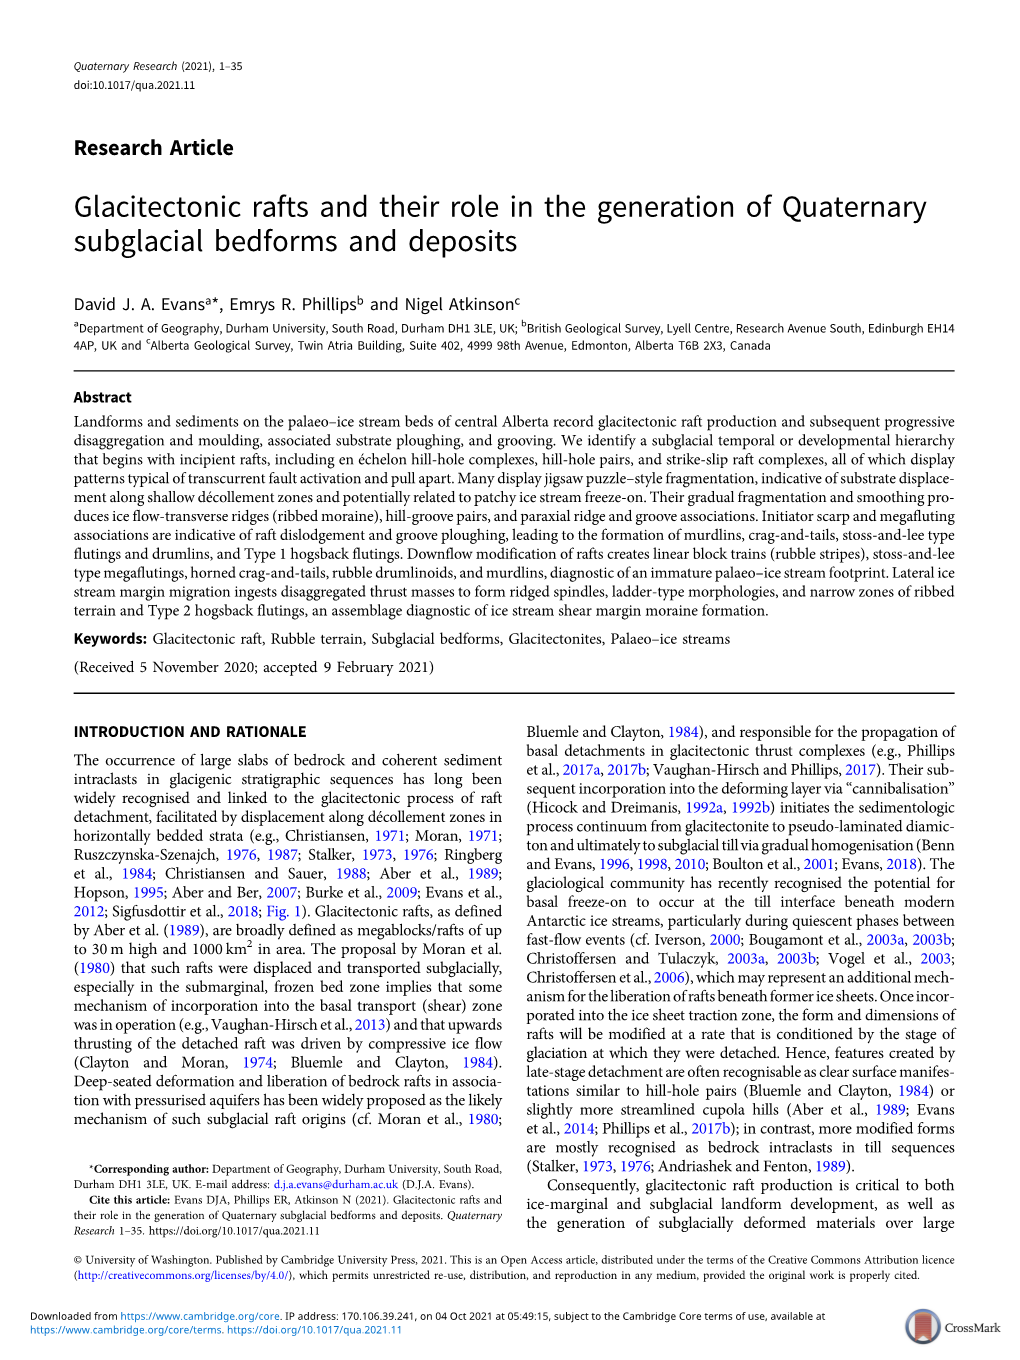 Glacitectonic Rafts and Their Role in the Generation of Quaternary Subglacial Bedforms and Deposits